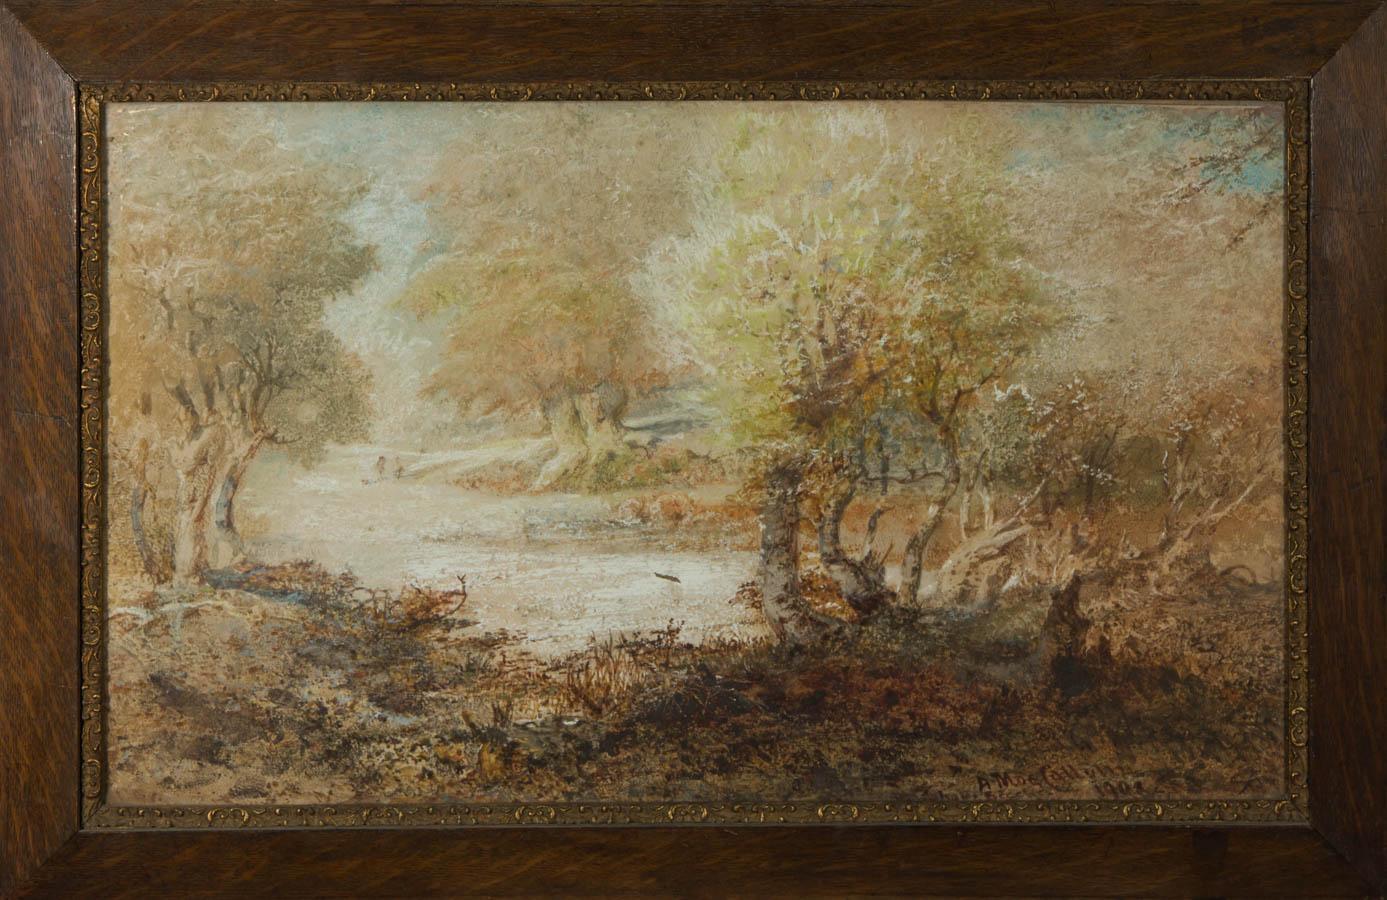 A delicate and whimsical watercolour depicting a river winding through British woodland on a bright summer's day.

This delicate watercolour has been finished with body-colour highlights.

Thew piece is ornately presented in a dark wood frame with a